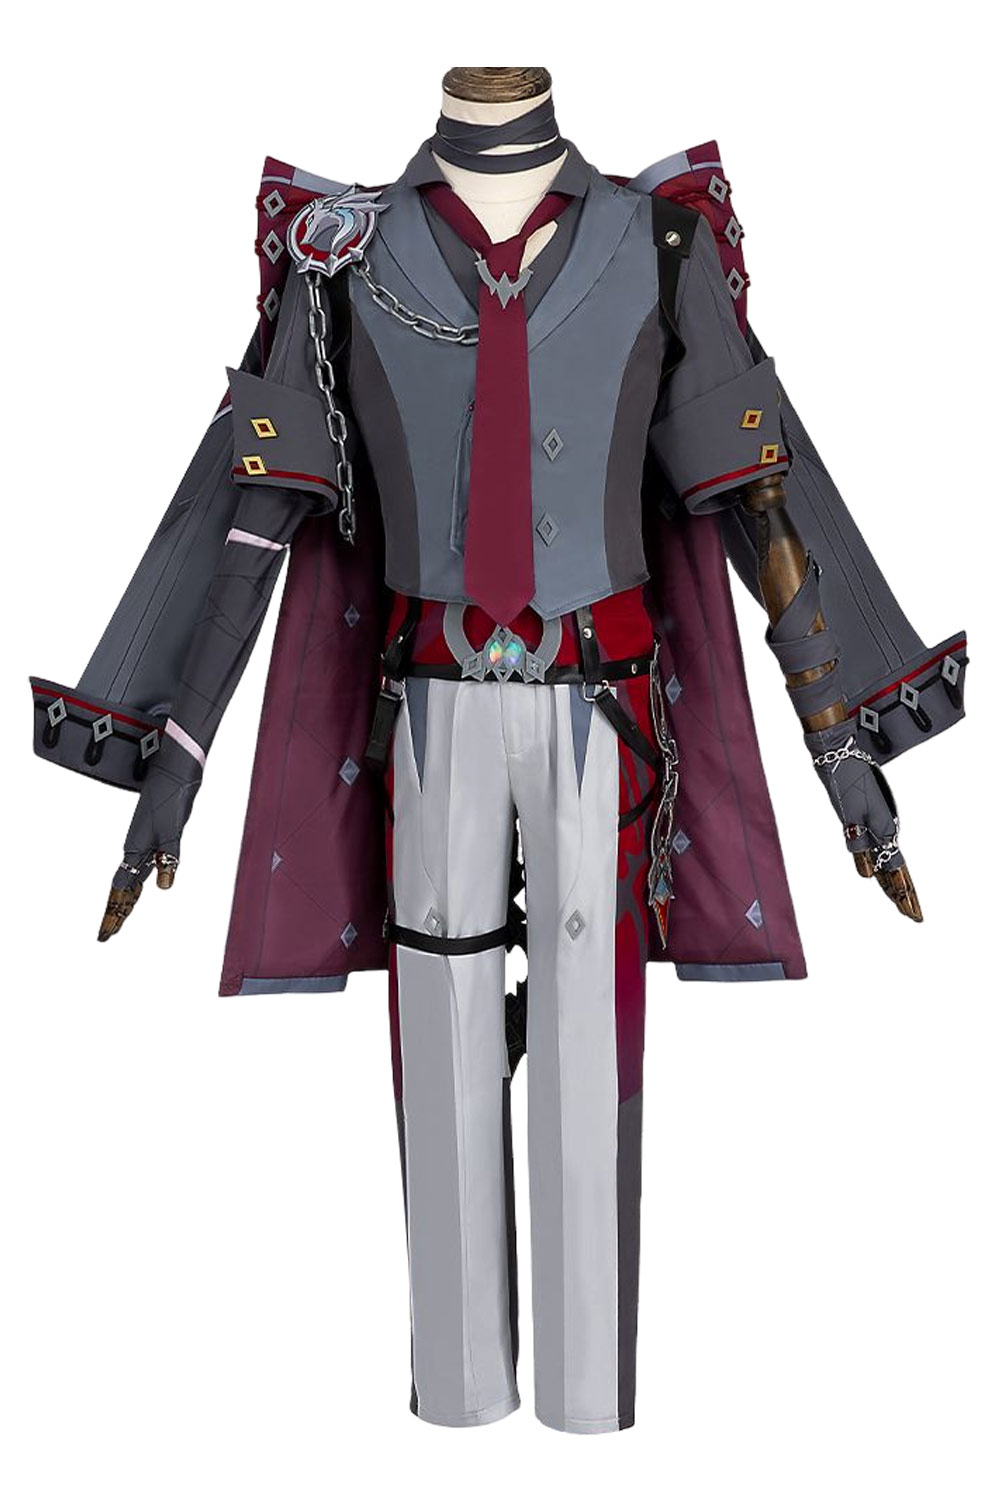 Game Genshin Impact Wriothesley Outfits Halloween Carnival Suit Cosplay Costume